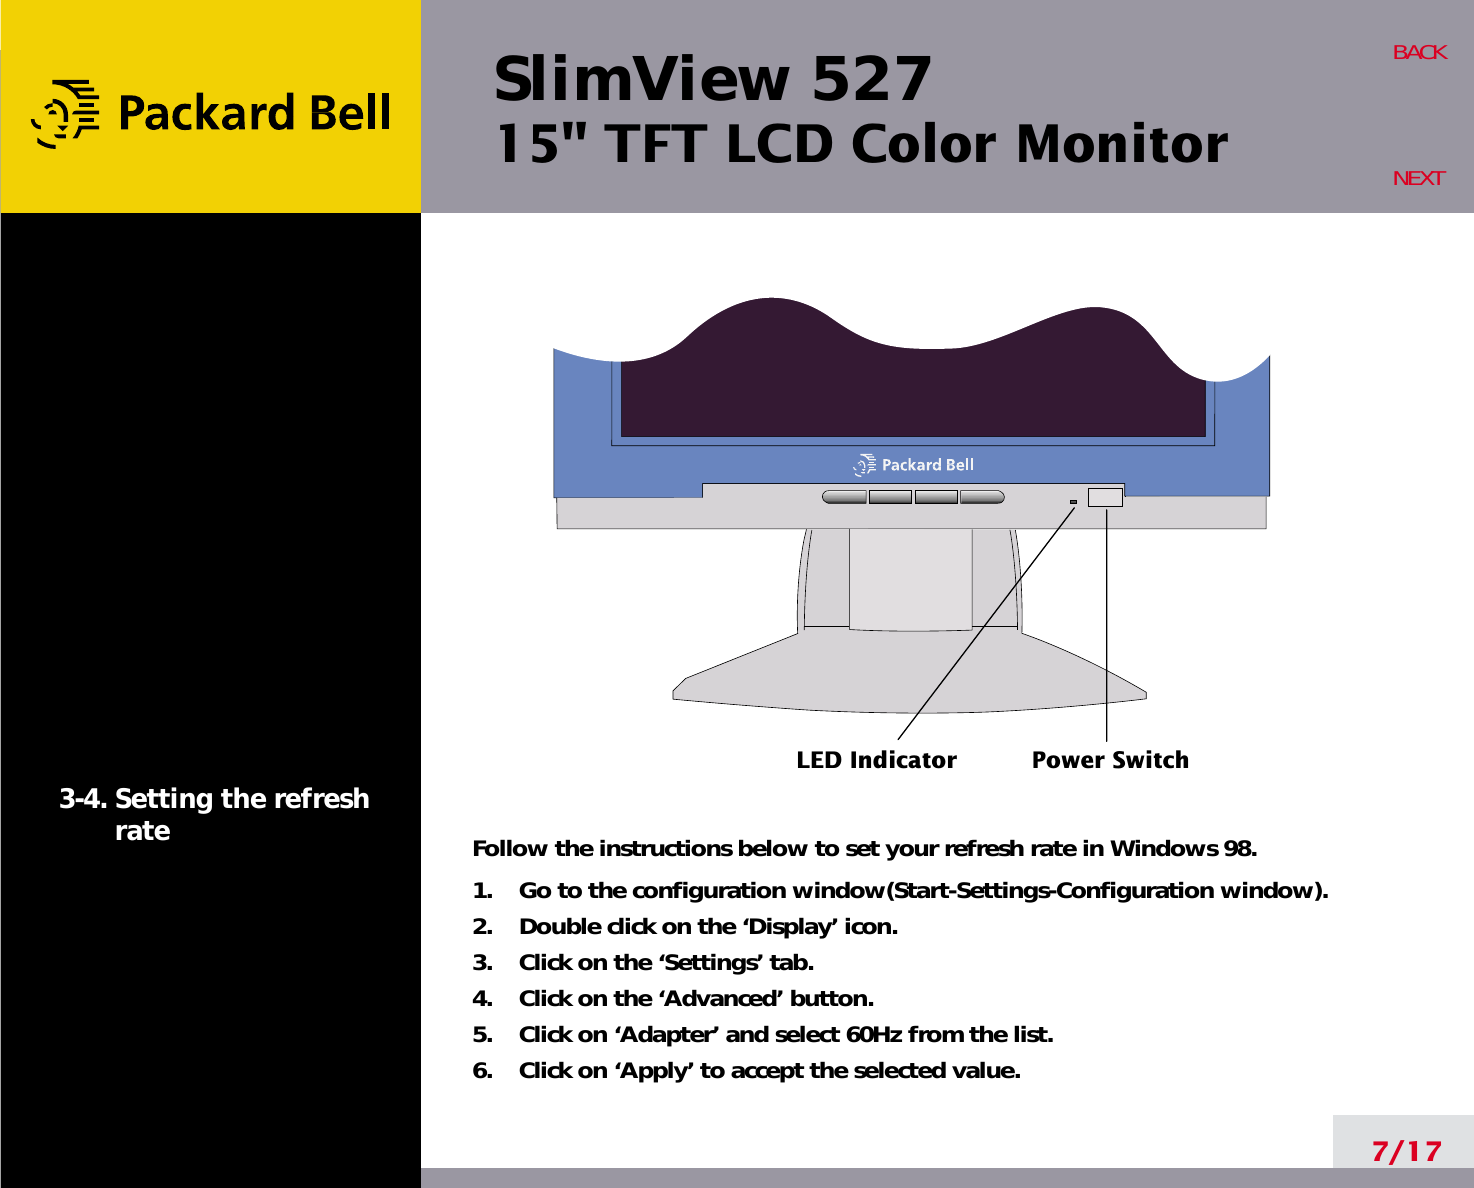 SlimView 52715&quot; TFT LCD Color Monitor7/17BACKNEXT3-4. Setting the refreshrate Follow the instructions below to set your refresh rate in Windows 98.1.    Go to the configuration window(Start-Settings-Configuration window).2.    Double click on the ‘Display’ icon.3.    Click on the ‘Settings’ tab.4.    Click on the ‘Advanced’ button.5.    Click on ‘Adapter’ and select 60Hz from the list.6.    Click on ‘Apply’ to accept the selected value.LED Indicator Power Switch